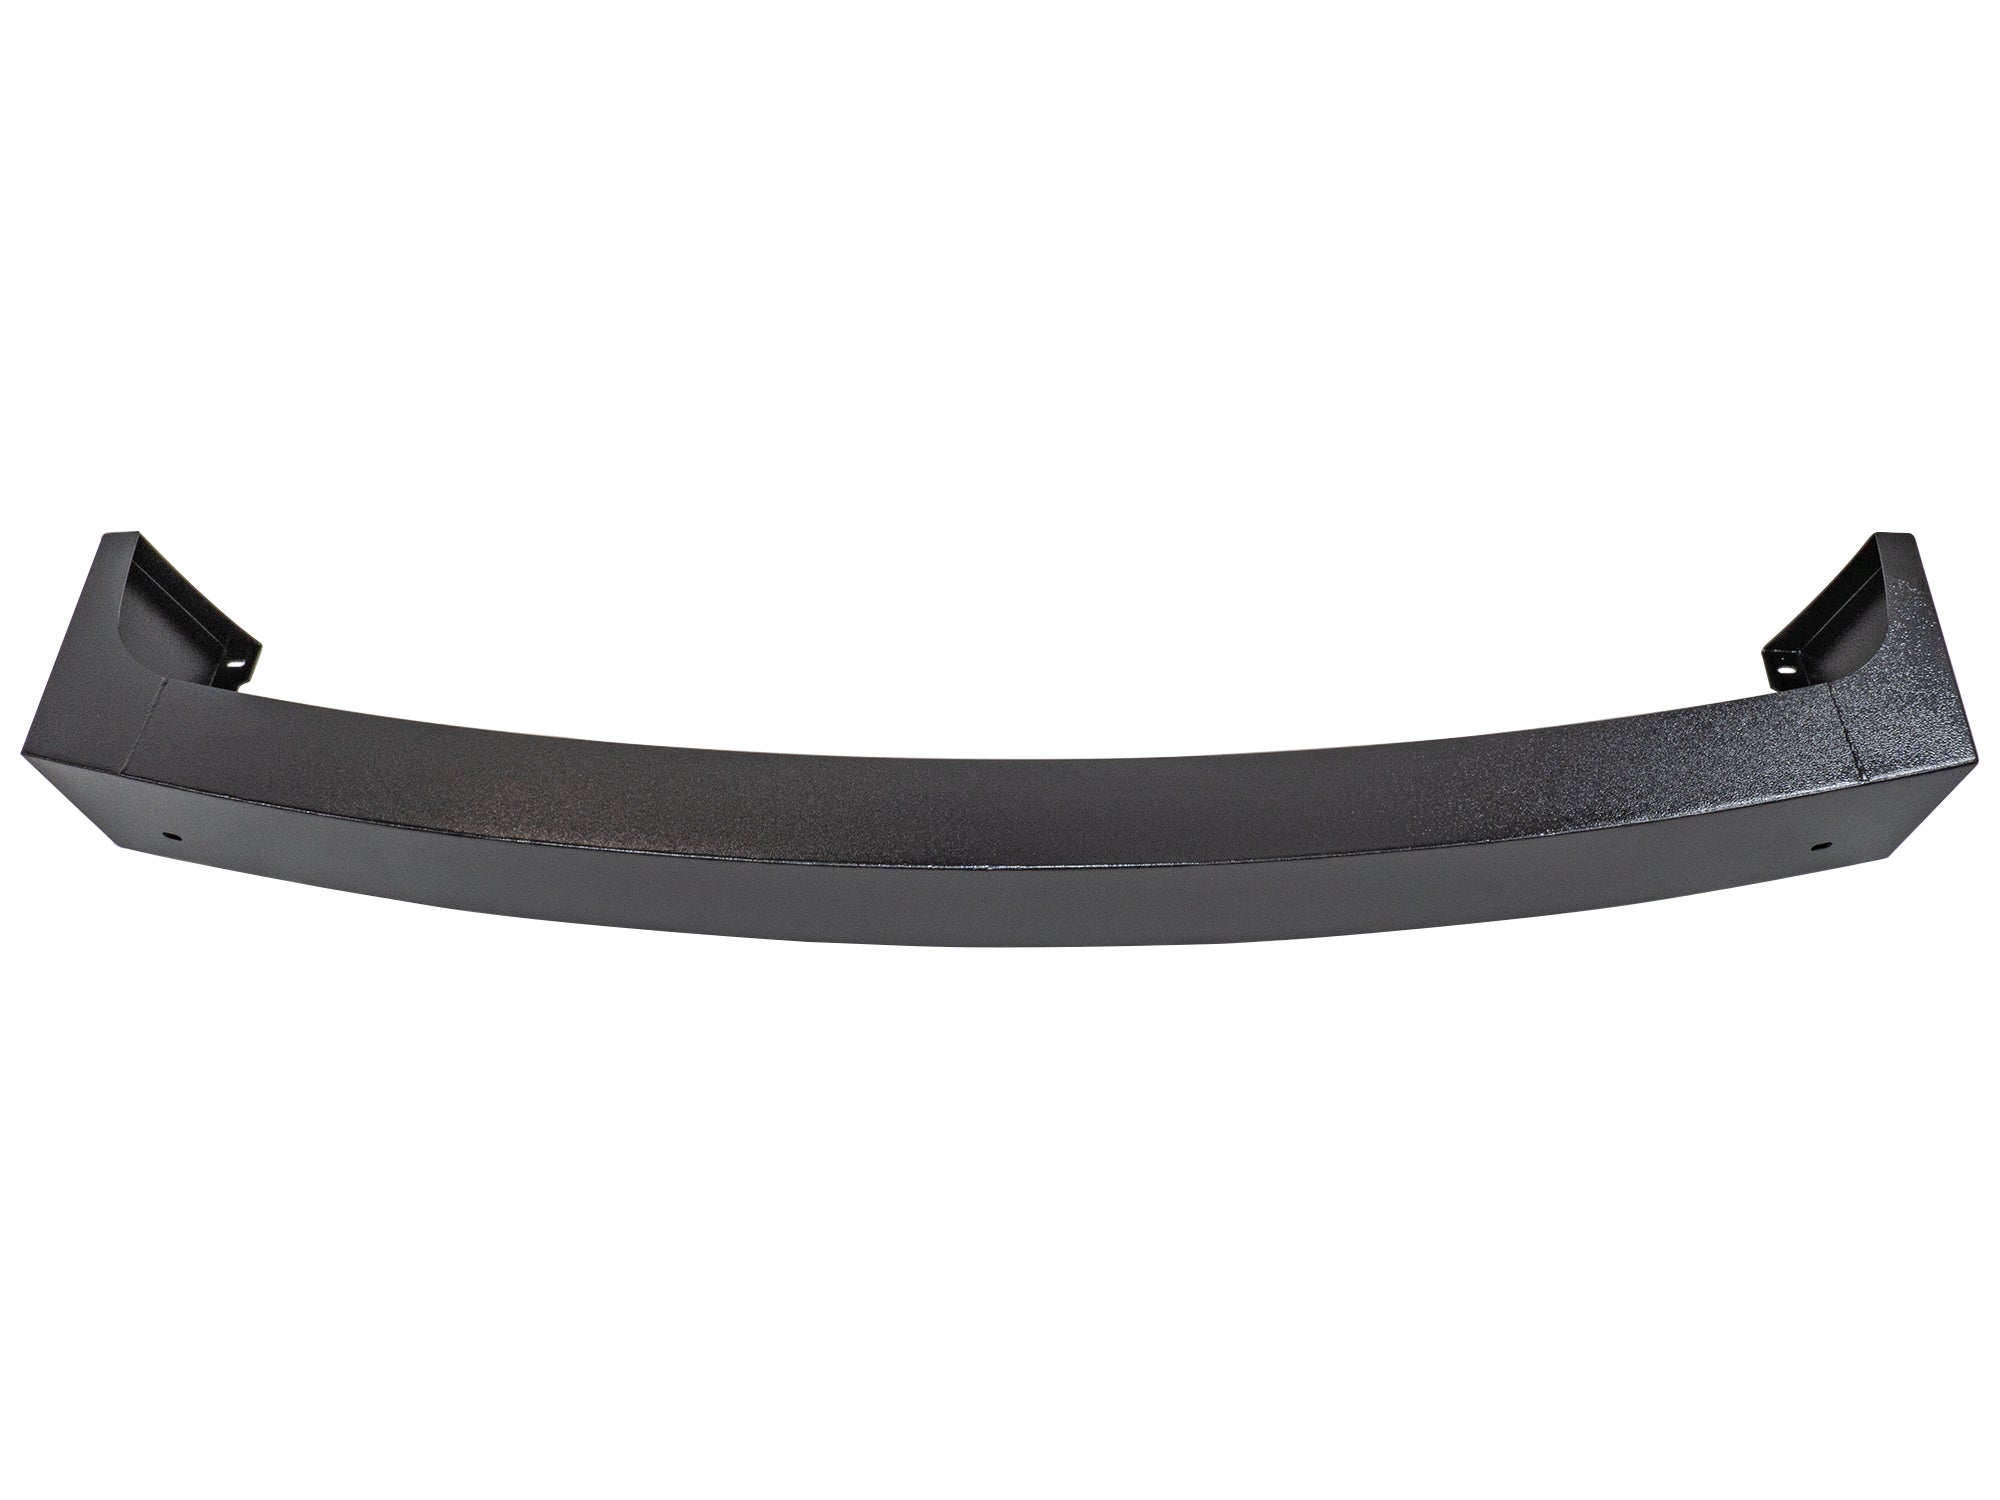 Gowesty plate steel front bumper – GoWesty